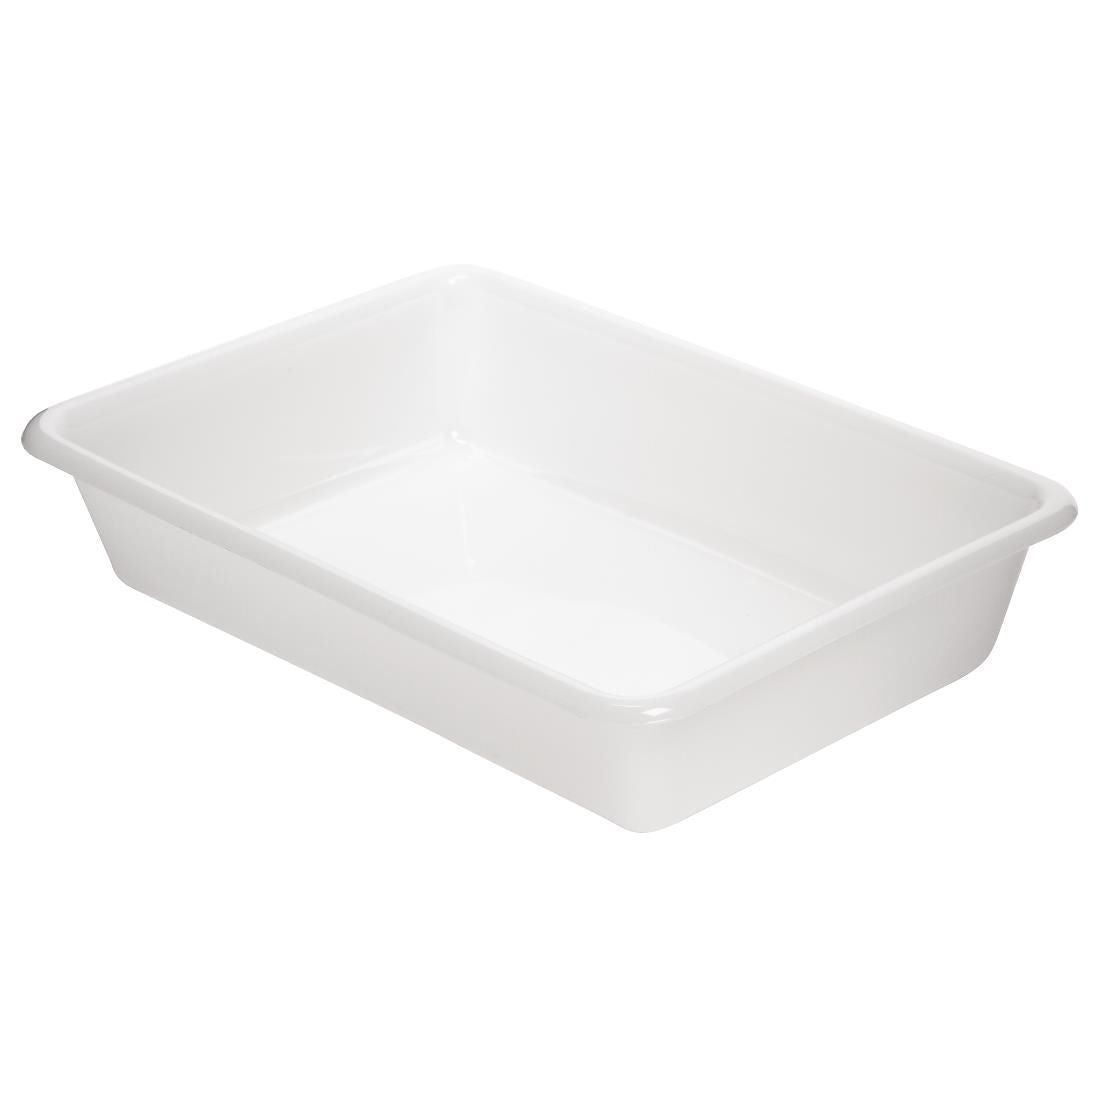 Araven Food Storage Tray 13in JD Catering Equipment Solutions Ltd